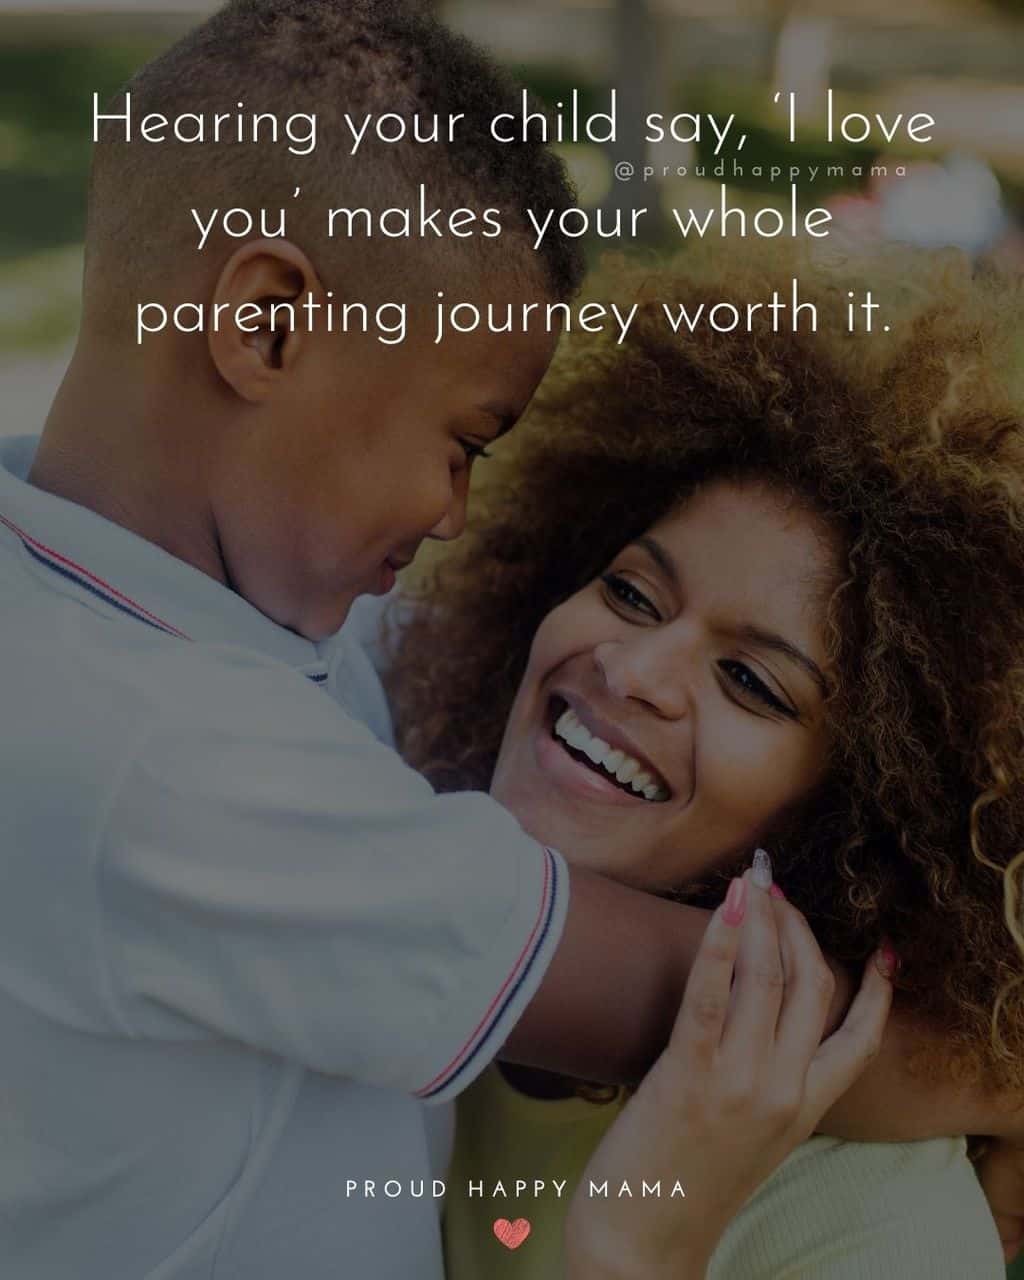 Parenting Quotes - Hearing your child say, ‘I love you’ makes your whole parenting journey worth it.’